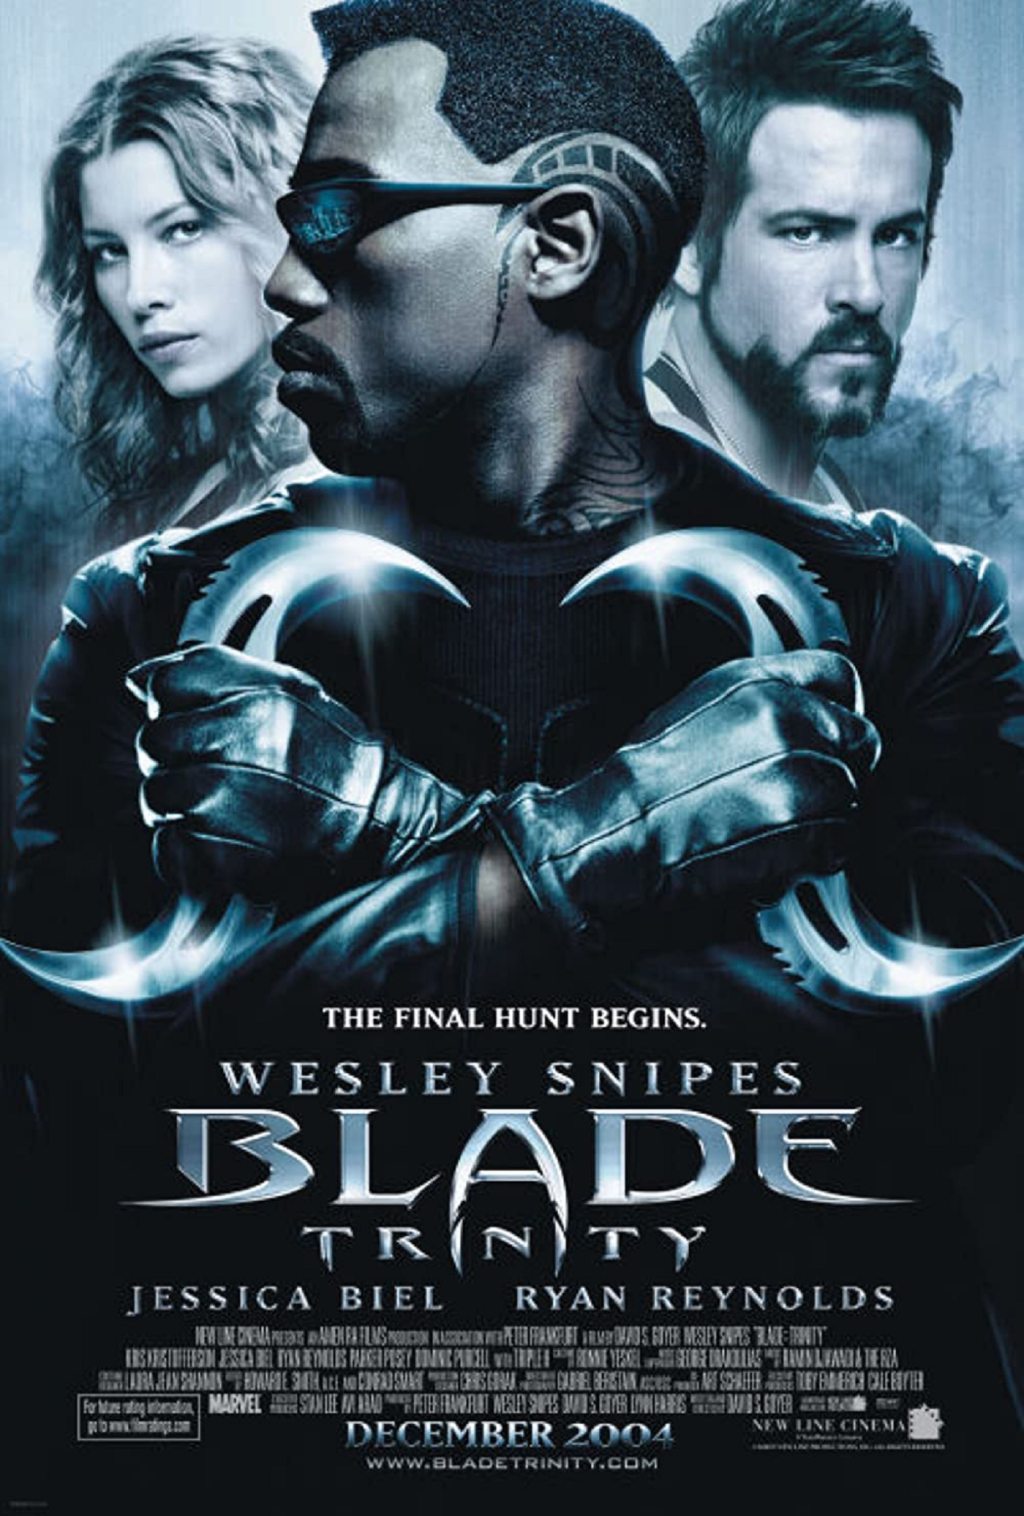 Blade: Trinity (2004) - Joanne Sheppard joins Tim Worthington for a chat about Eric Brooks finding himself up against BBC Three's idea of Dracula in It’s Good, Except It Sucks - a movie by movie – and television series by television series – hurtle through the Marvel Cinematic Universe.